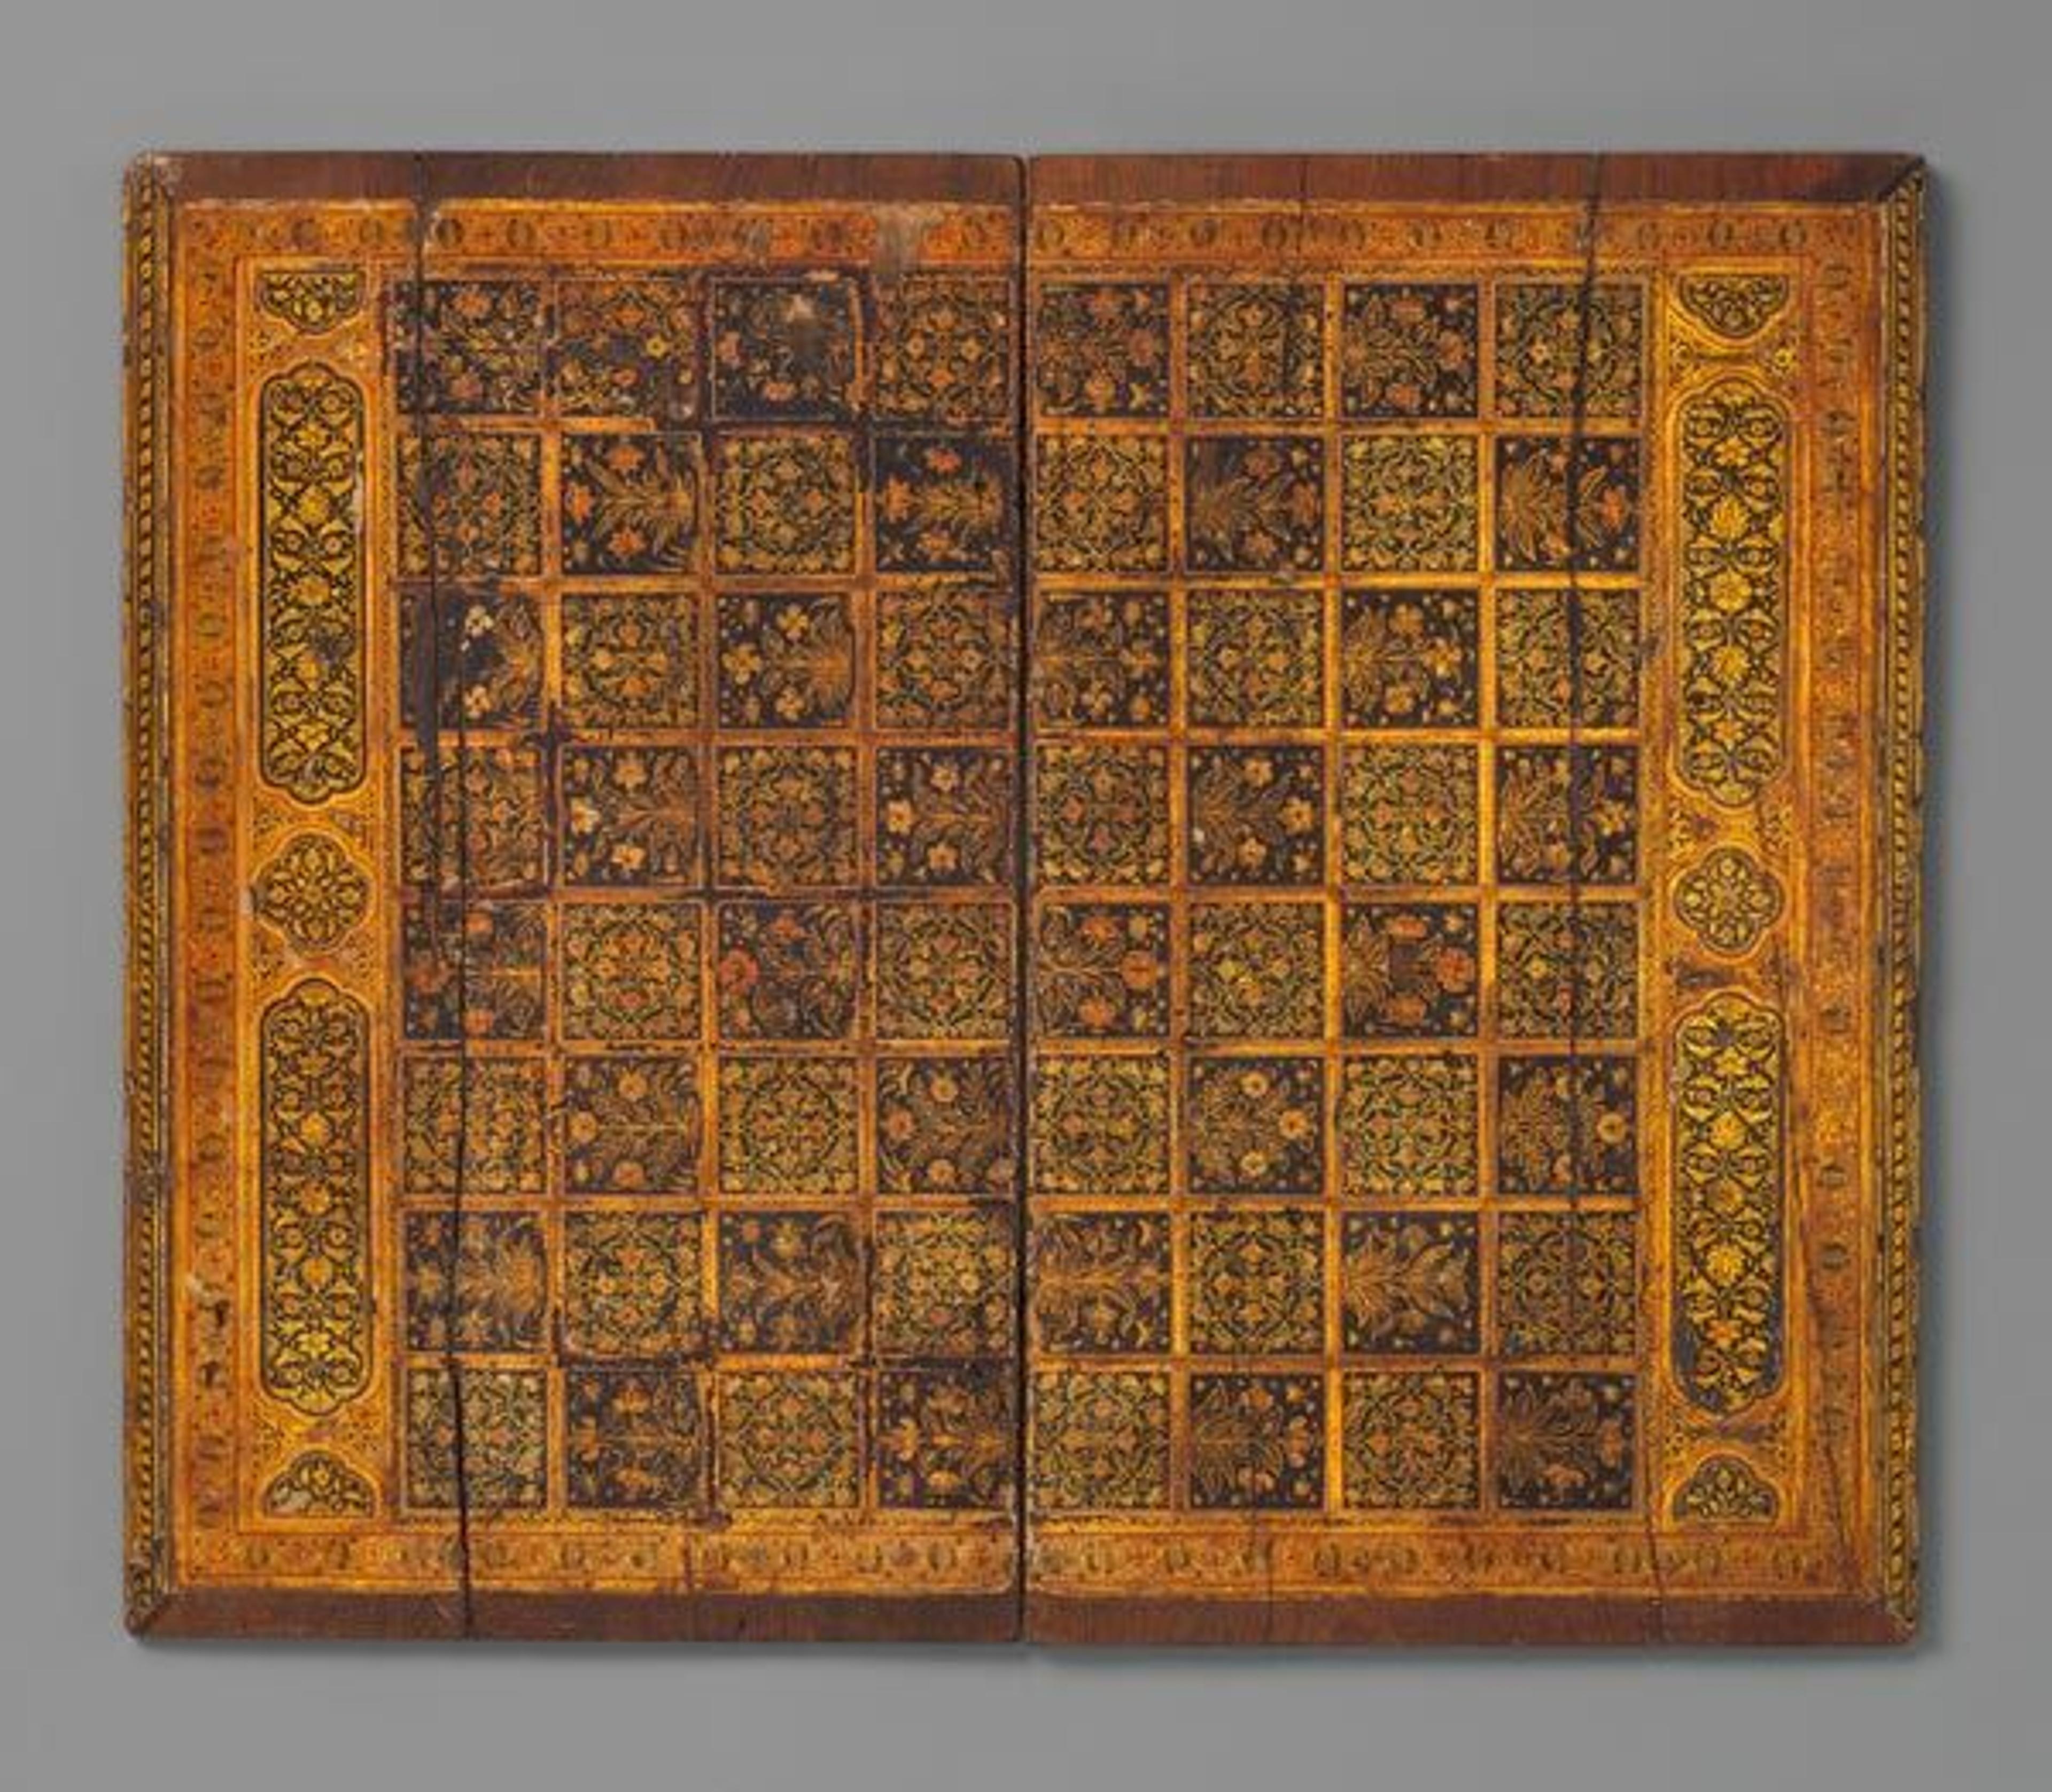 Floral gameboard, late 17th century. India. Islamic. Wood; painted, varnished and gilded; with metal hinges; H. 17 1/4 in. (43.8 cm) W. 14 3/8 in. (36.5 cm) D. 1/4 in. (0.6 cm). The Metropolitan Museum of Art, New York, Louis E. and Theresa S. Seley Purchase Fund for Islamic Art and Rogers Fund, 1983 (1983.374)